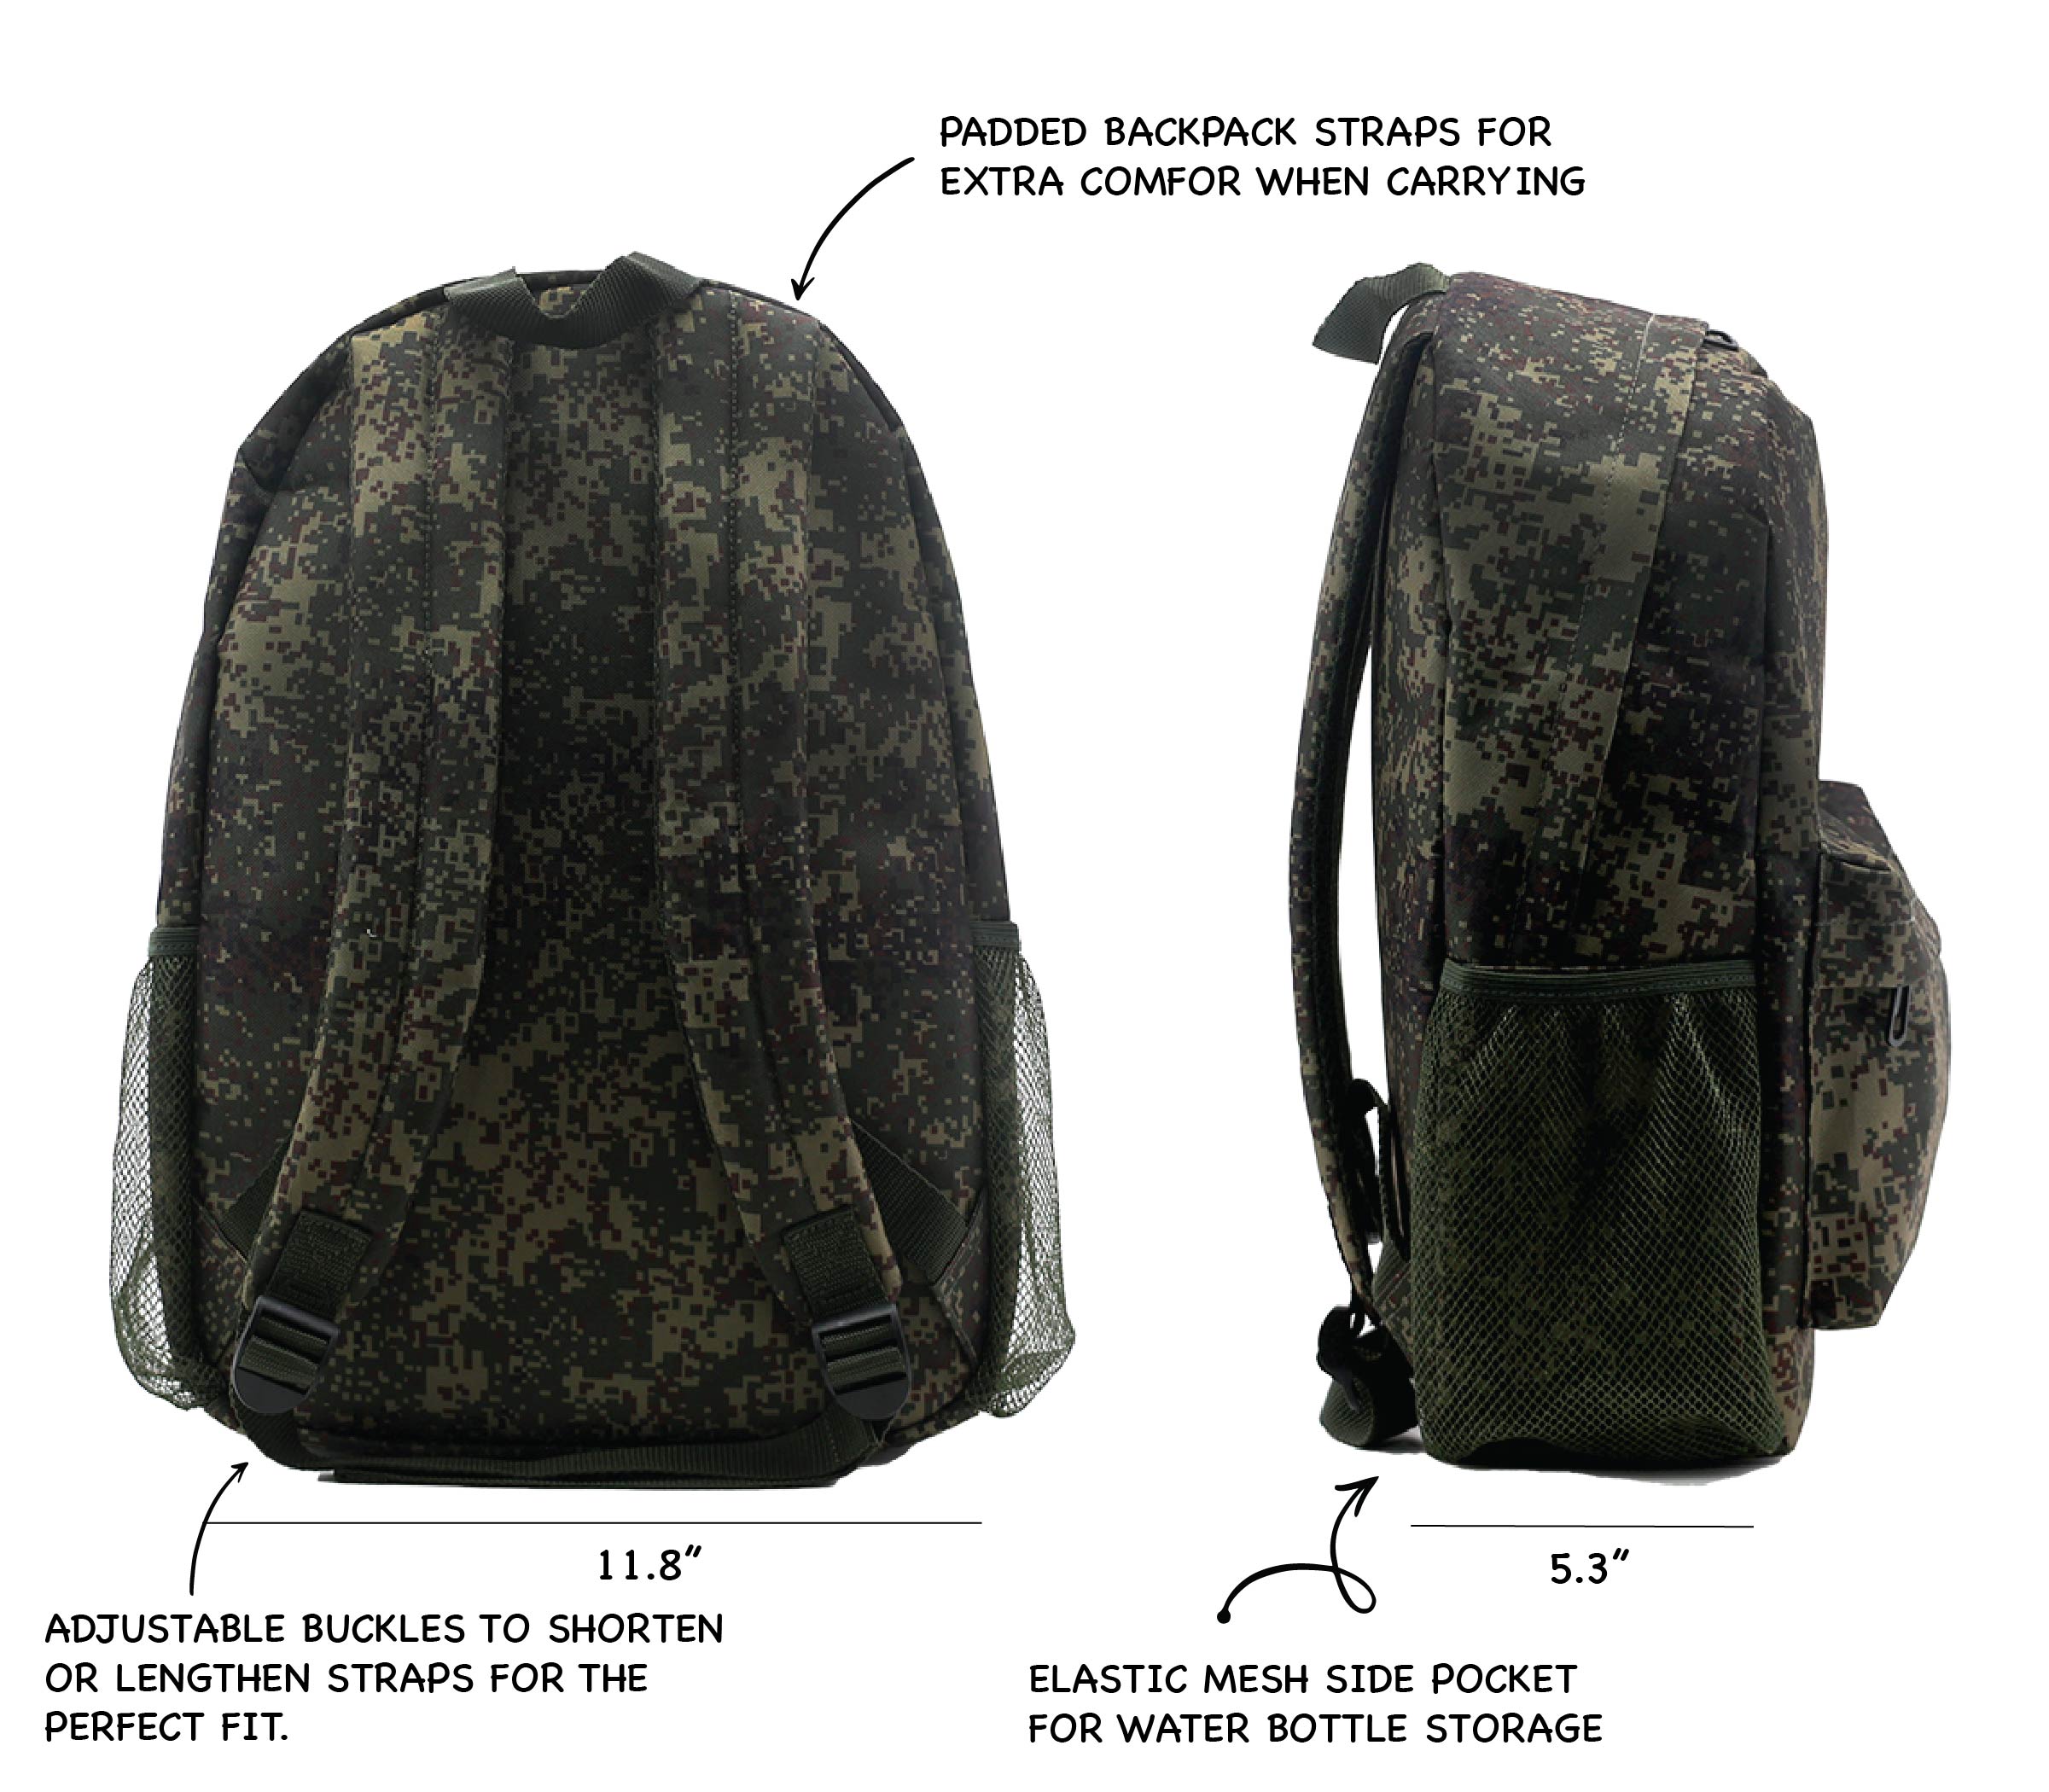 OMG ORGANIZE MY GEAR 2-in-1 Kids Backpack & Pencil Pouch Set, Elementary School Backpack for Kids (Camo) - image 3 of 6